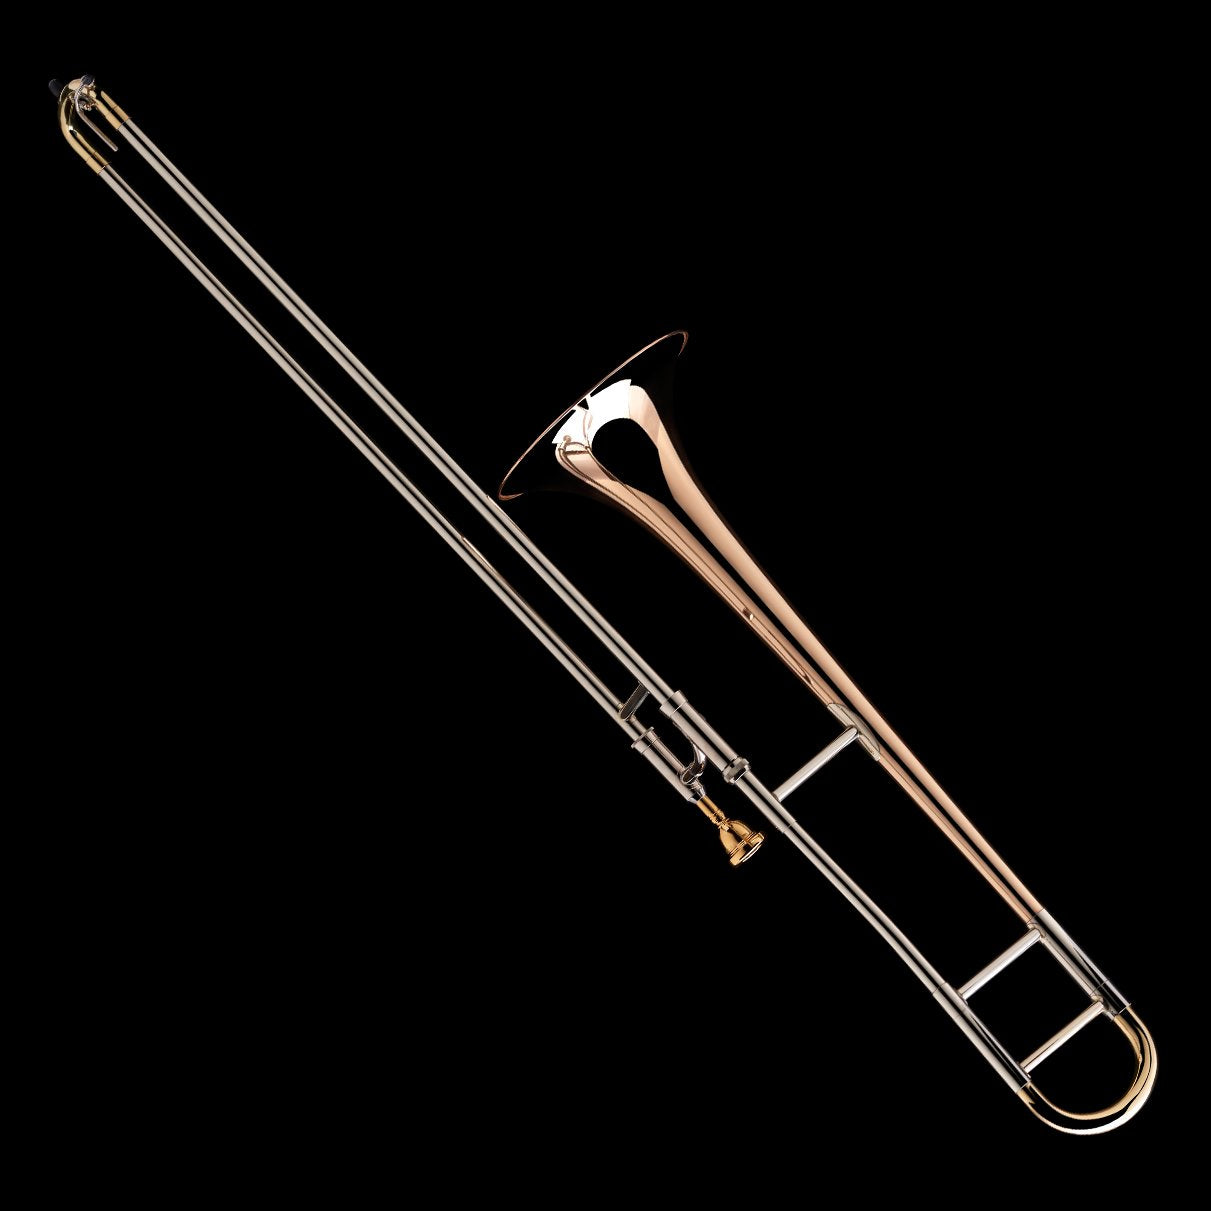 An alternative image of a Bb Tenor Trombone from Wessex Tubas